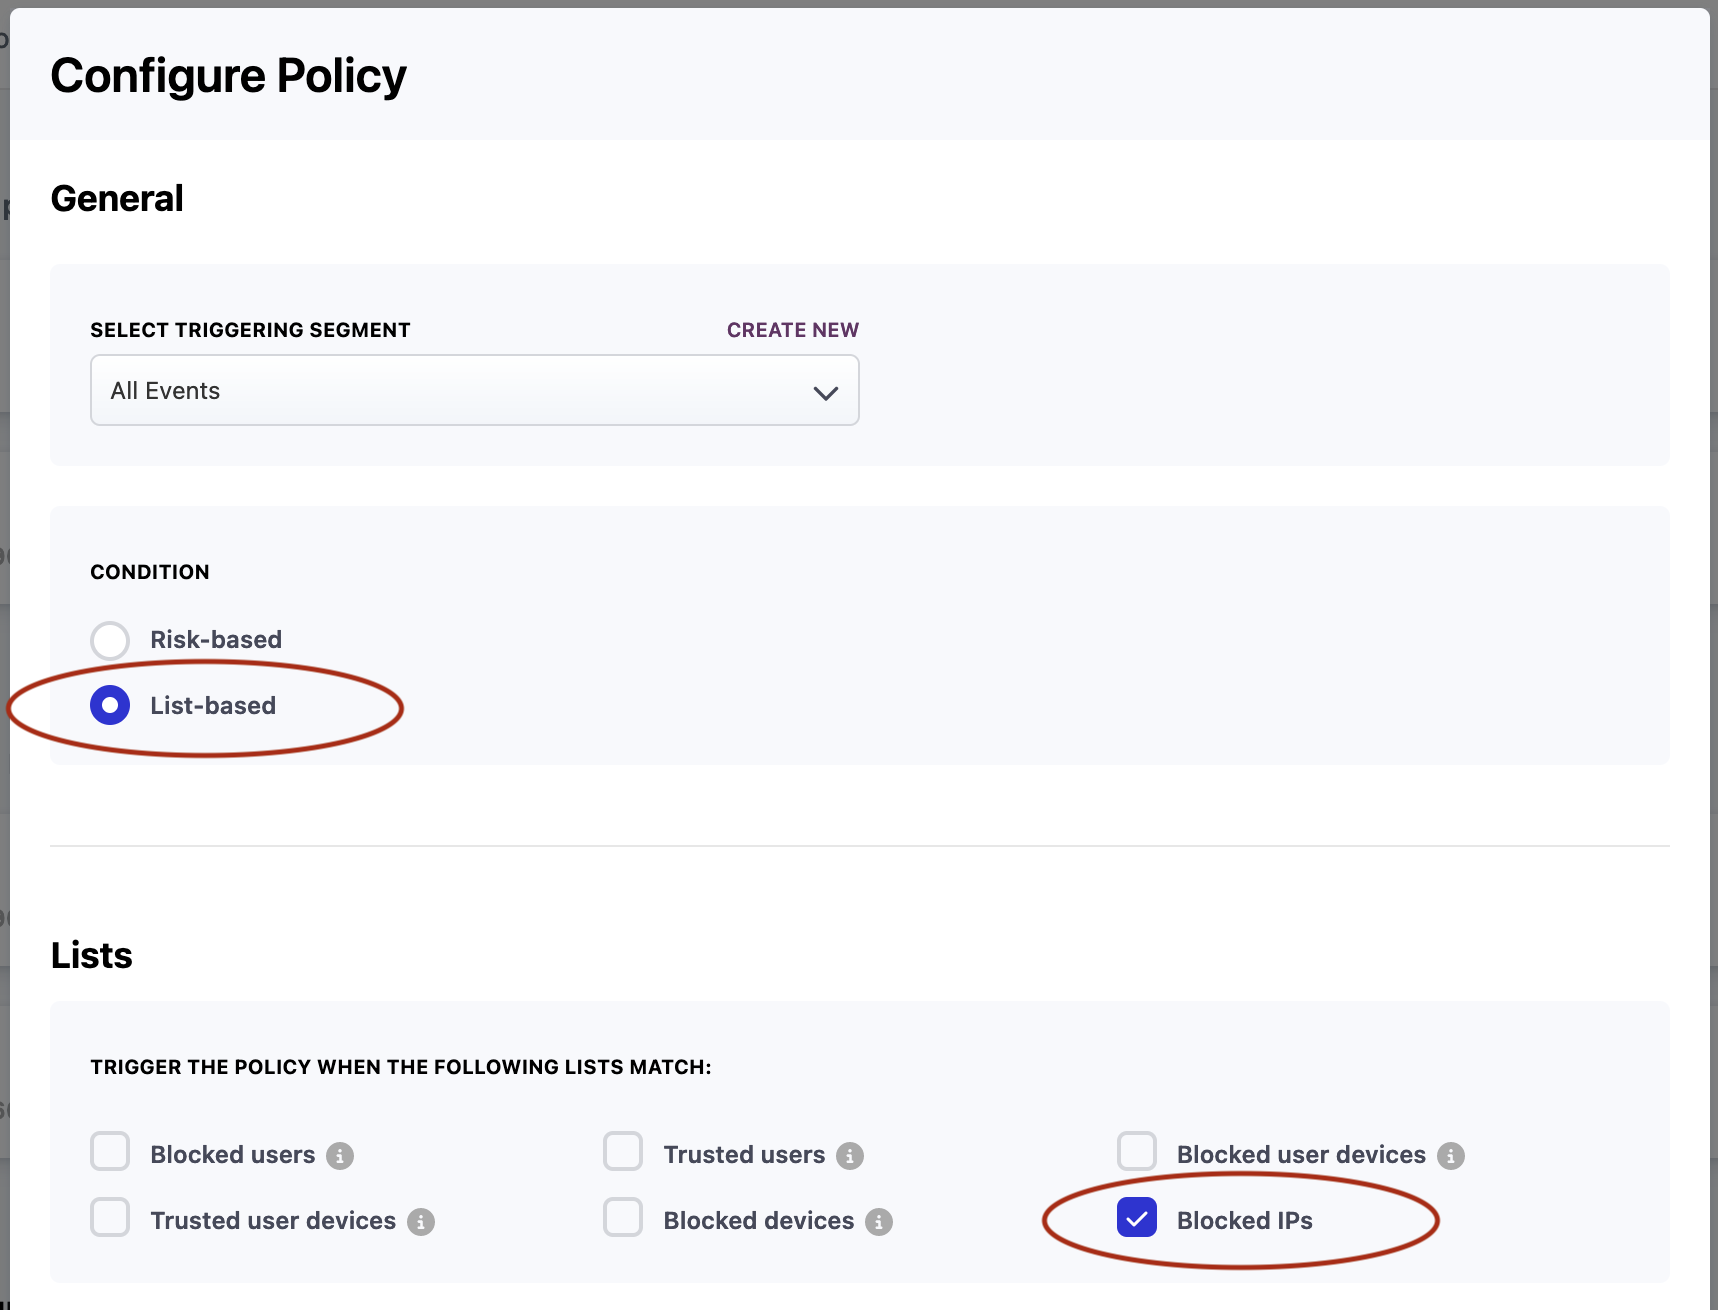 List-based policies determines the returned action based on matching entries in a List